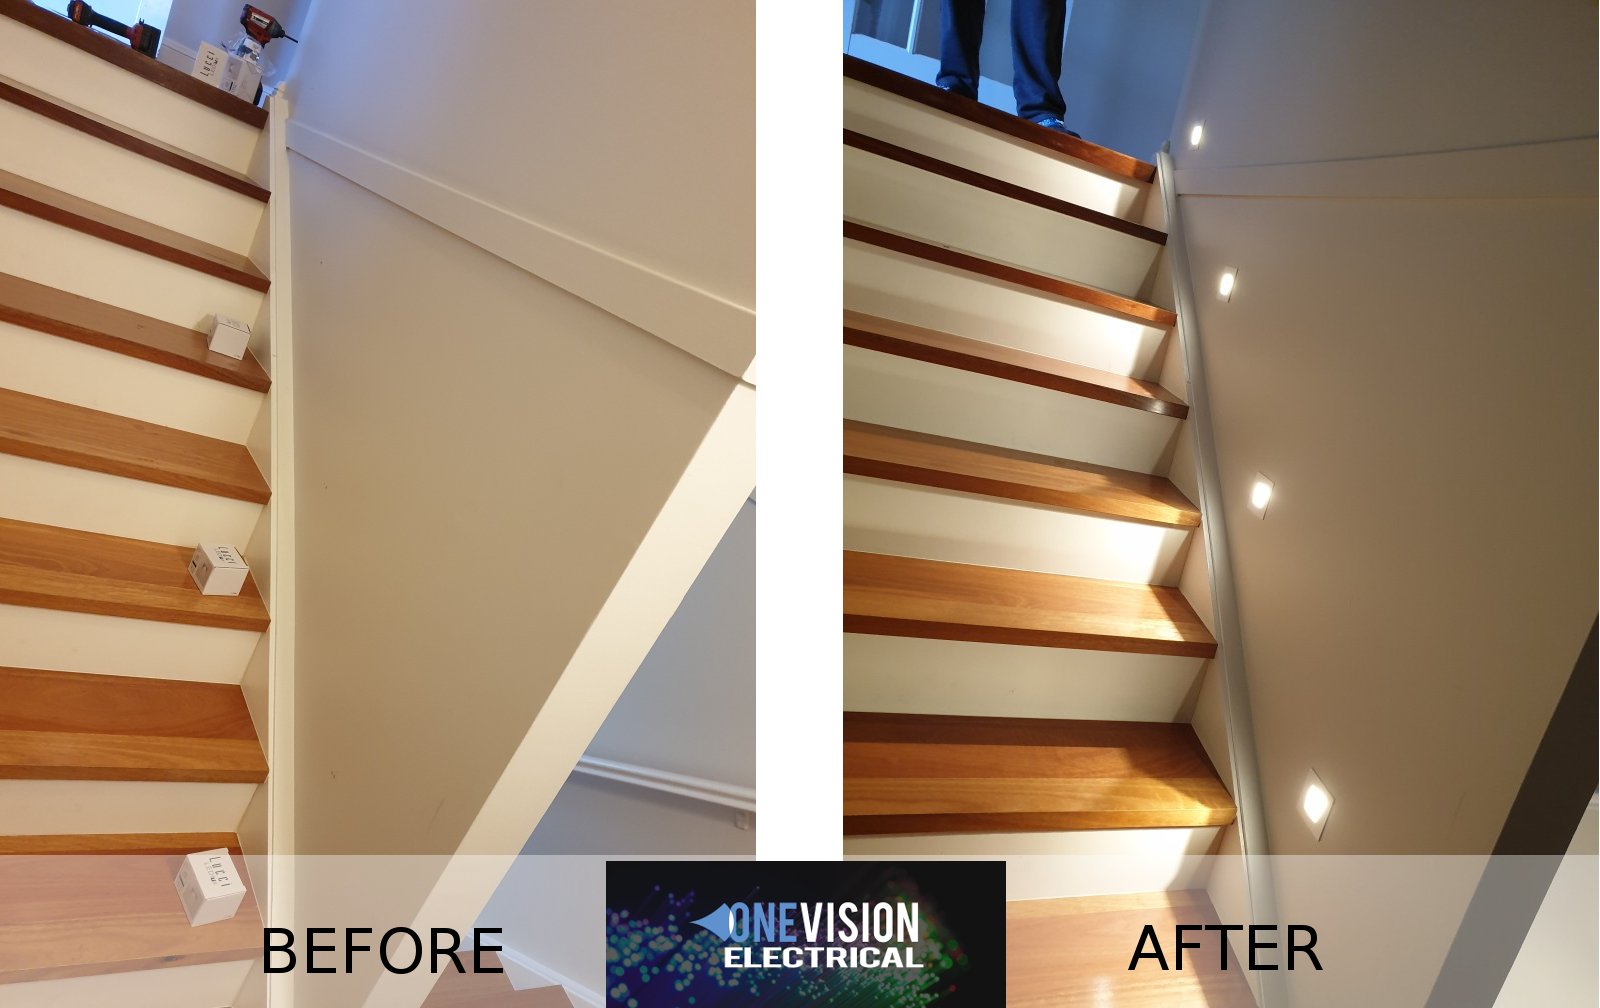 Led Lights for stairs - Hornsby NSW